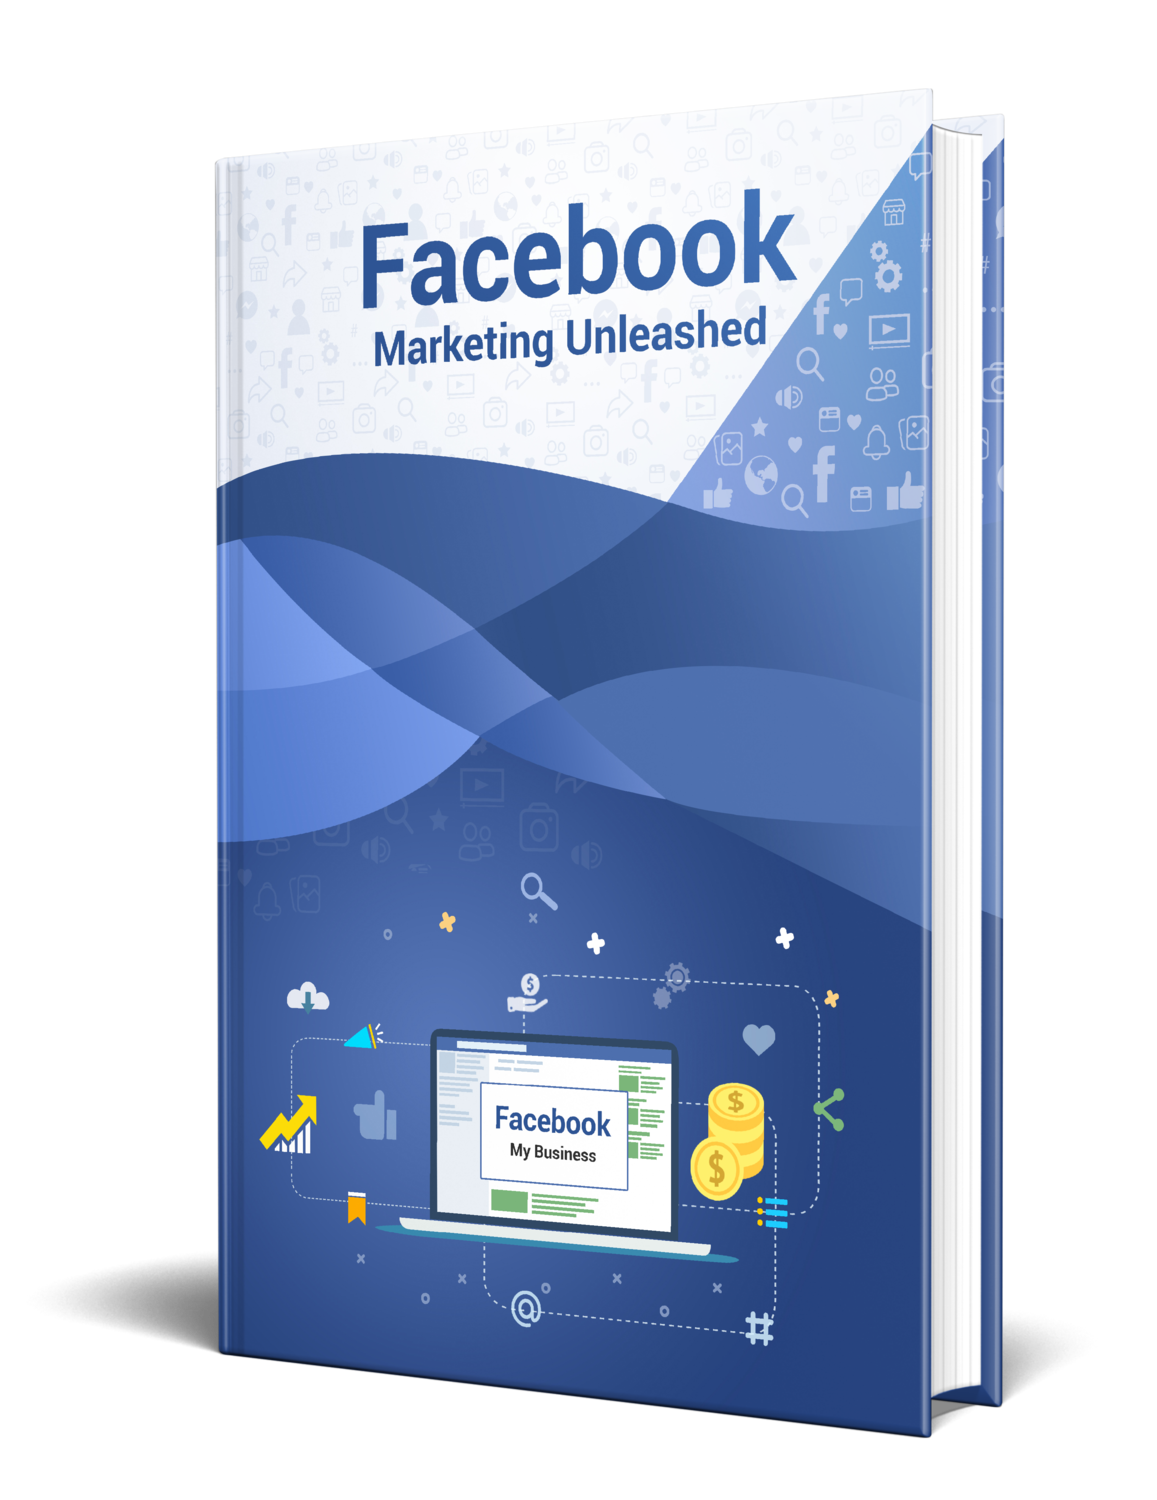 Facebook Marketing Unleashed - Learn how to market your business on Facebook